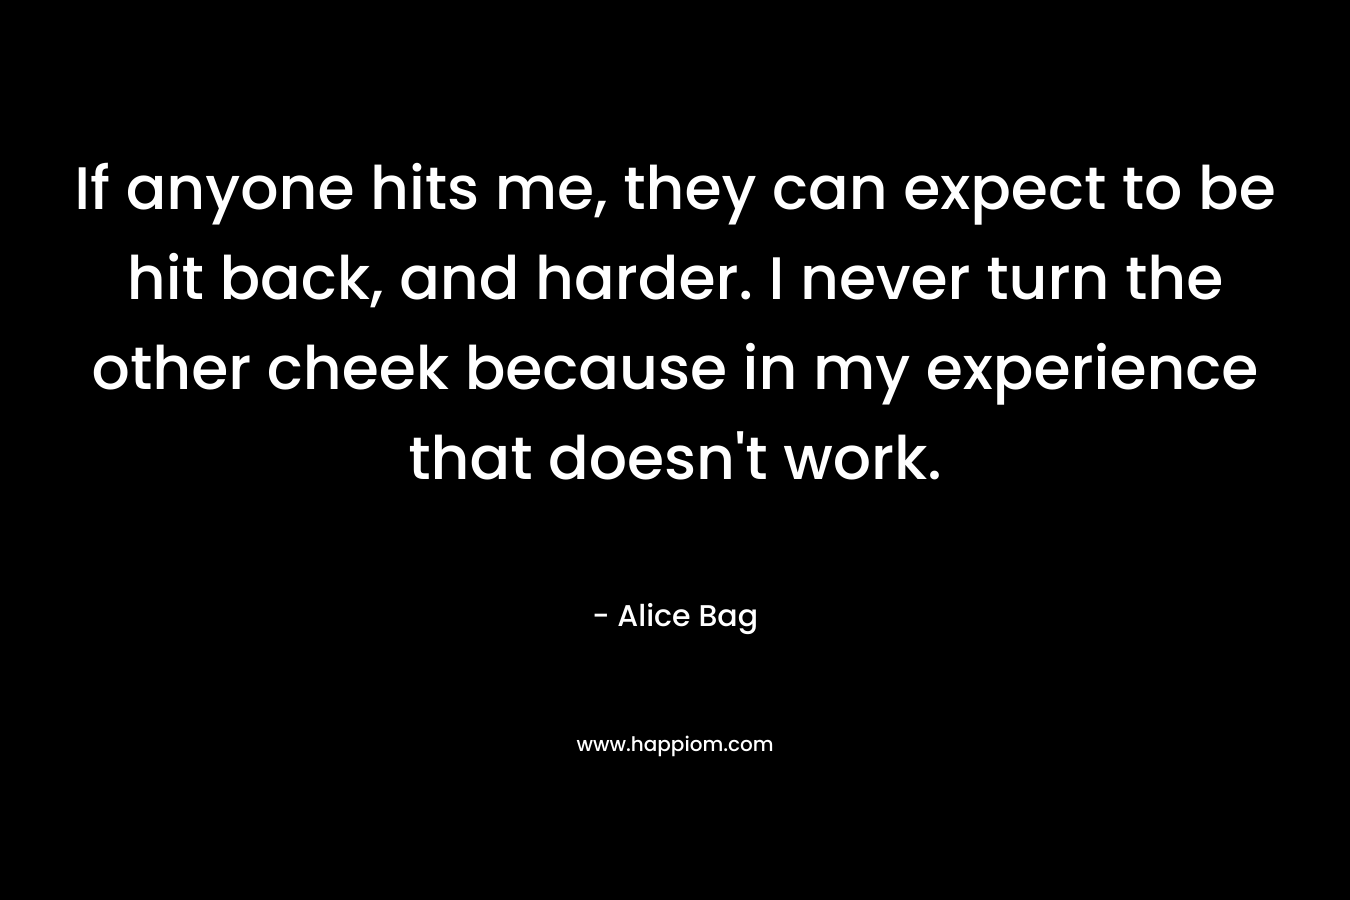 If anyone hits me, they can expect to be hit back, and harder. I never turn the other cheek because in my experience that doesn’t work. – Alice Bag